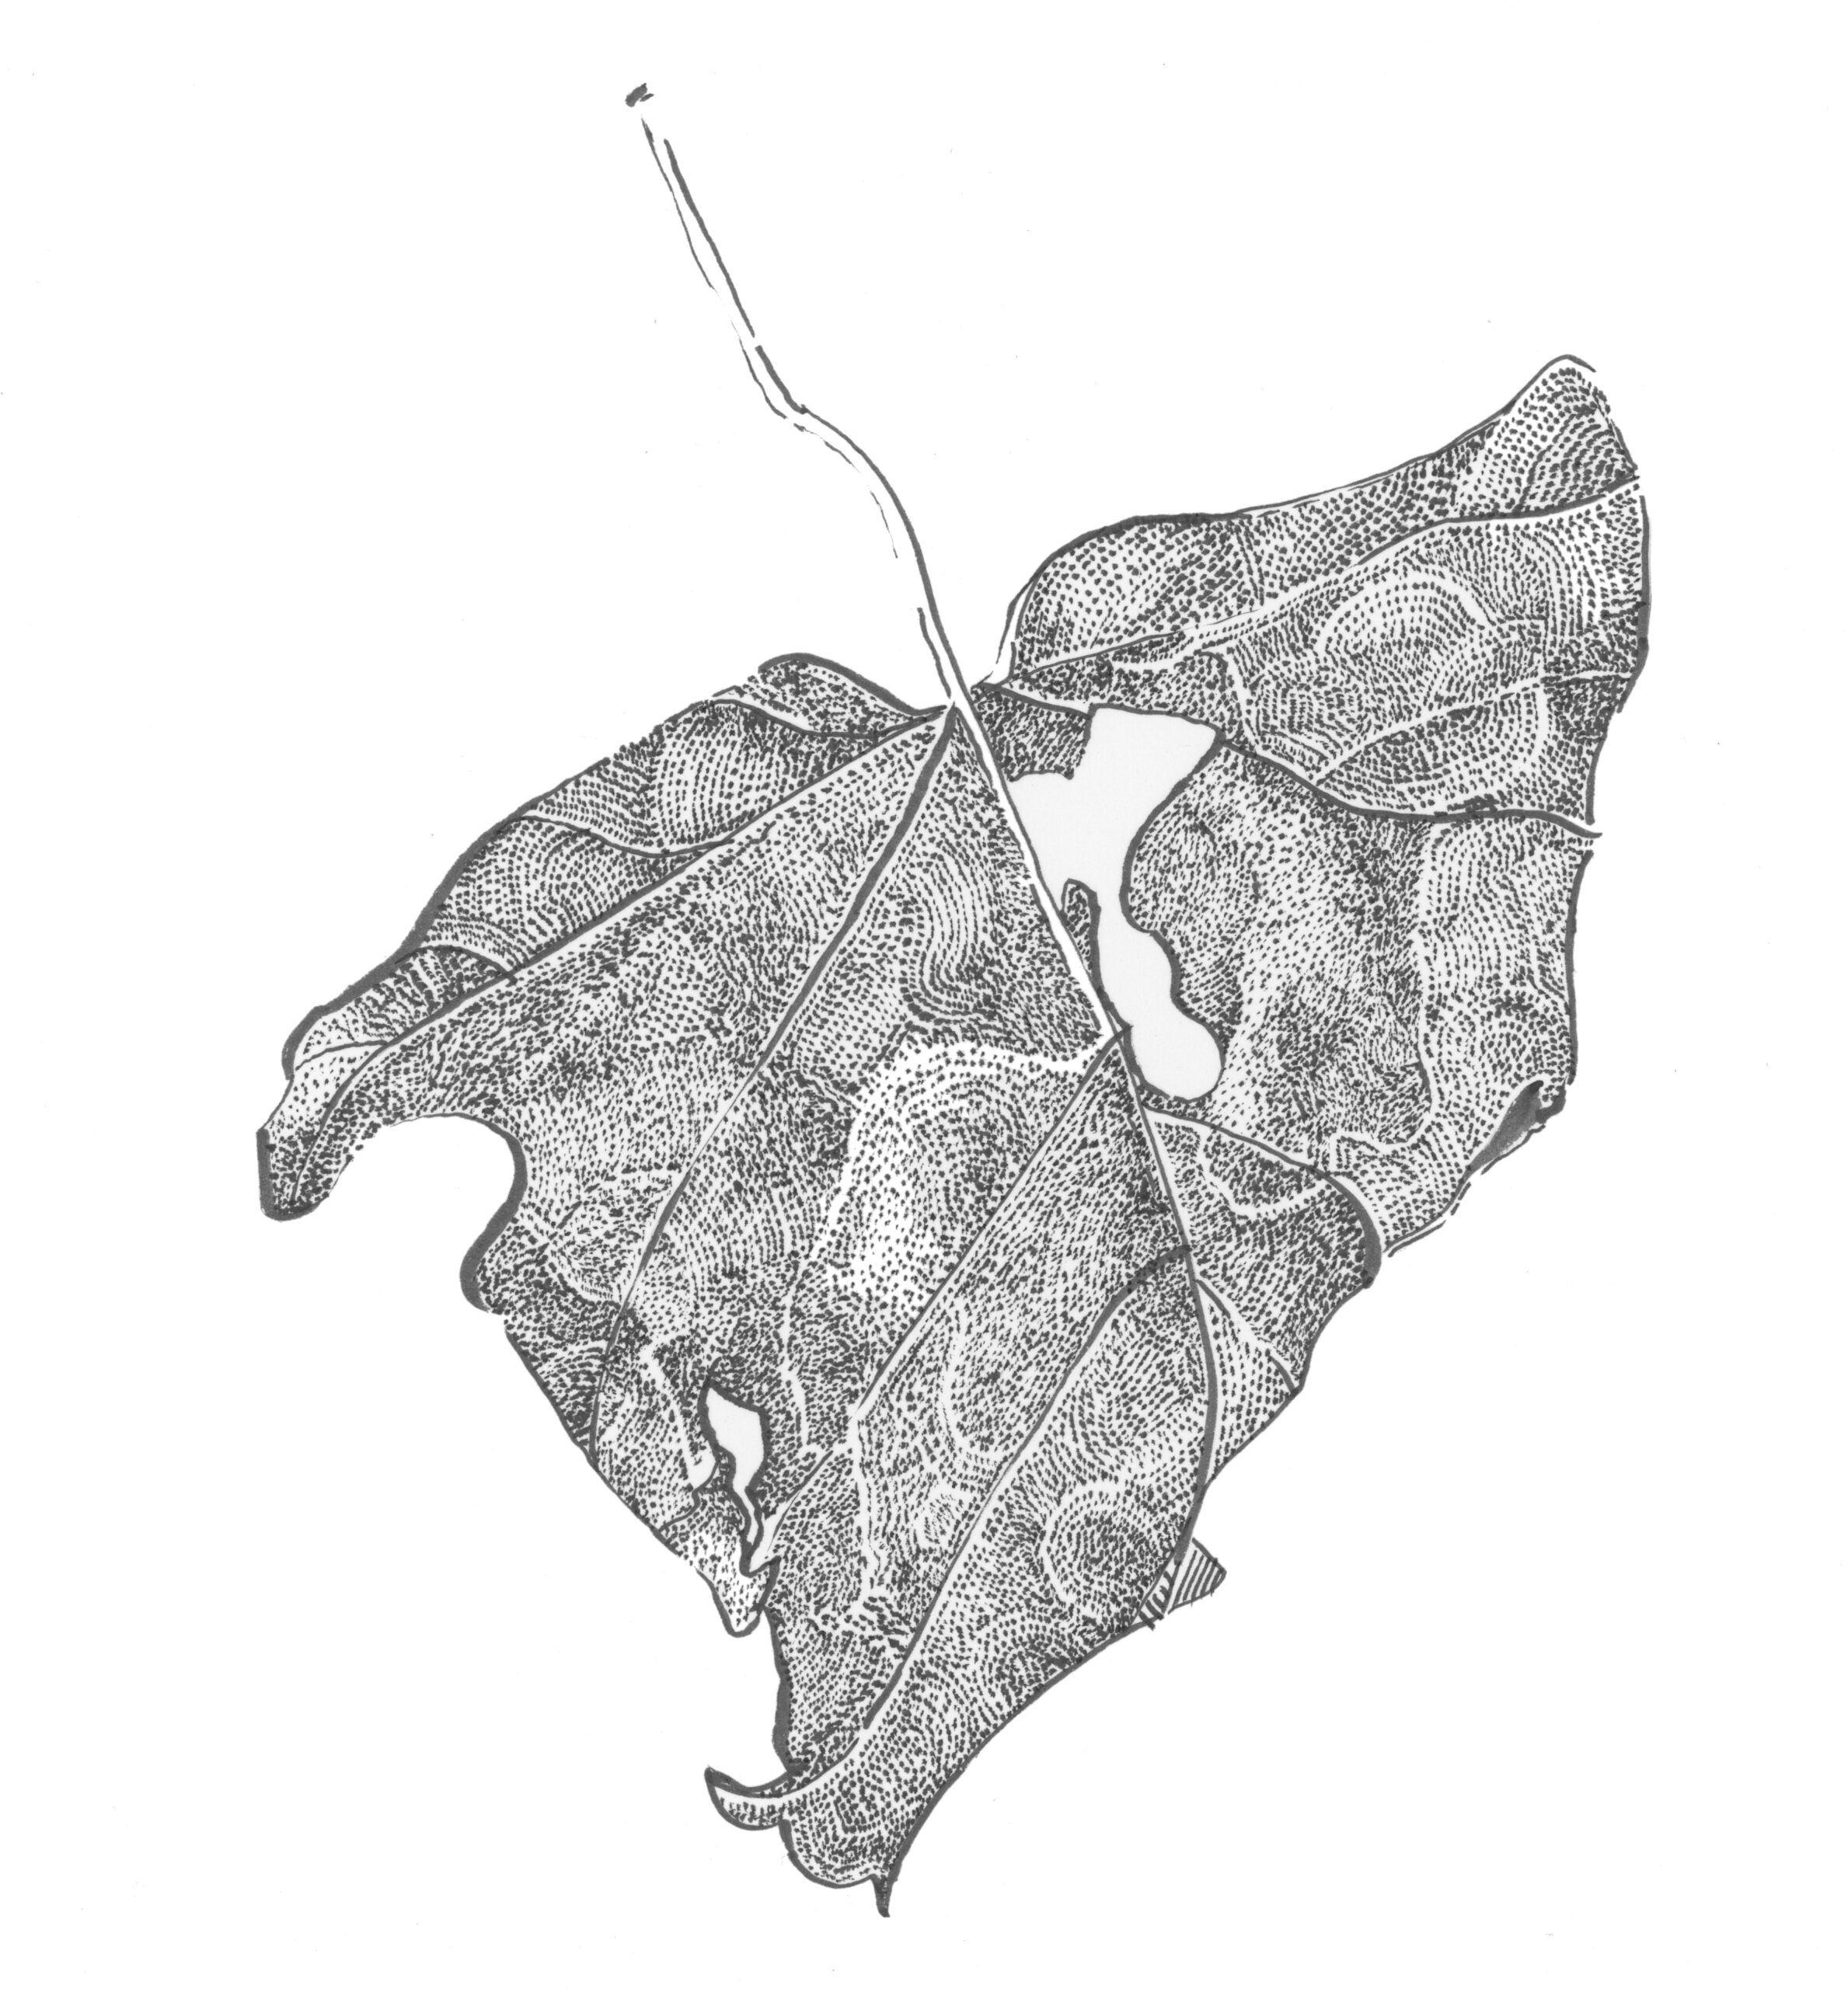 Monochrome ink drawing of dried maple leaf, with details stippling.